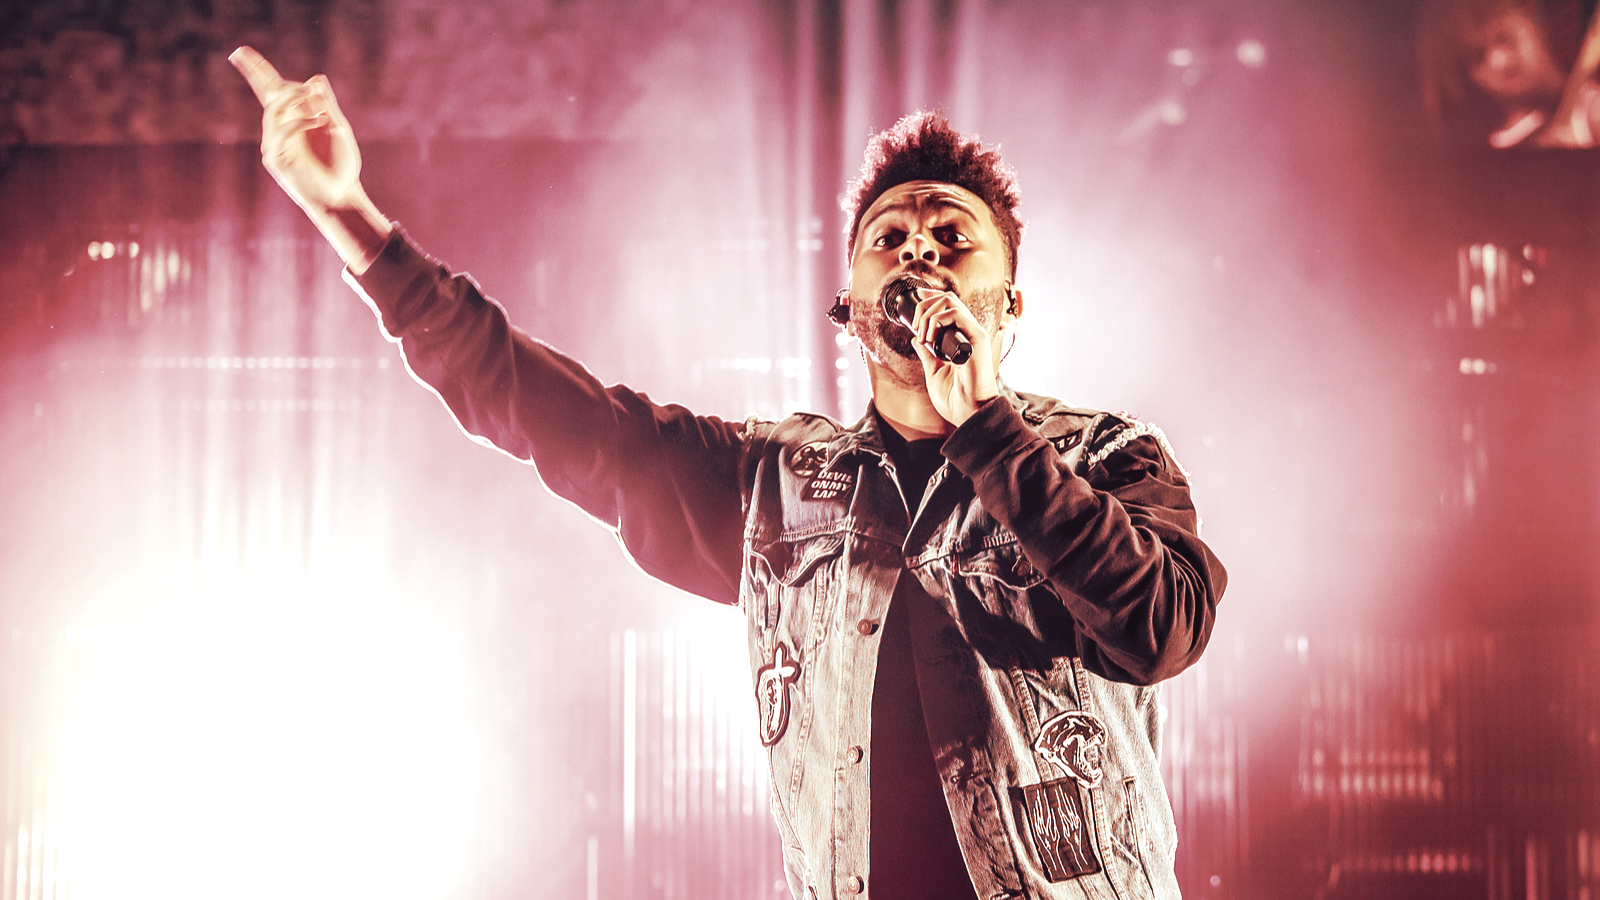 Binance and The Weeknd Launch a ‘Crypto-Powered’ World Tour